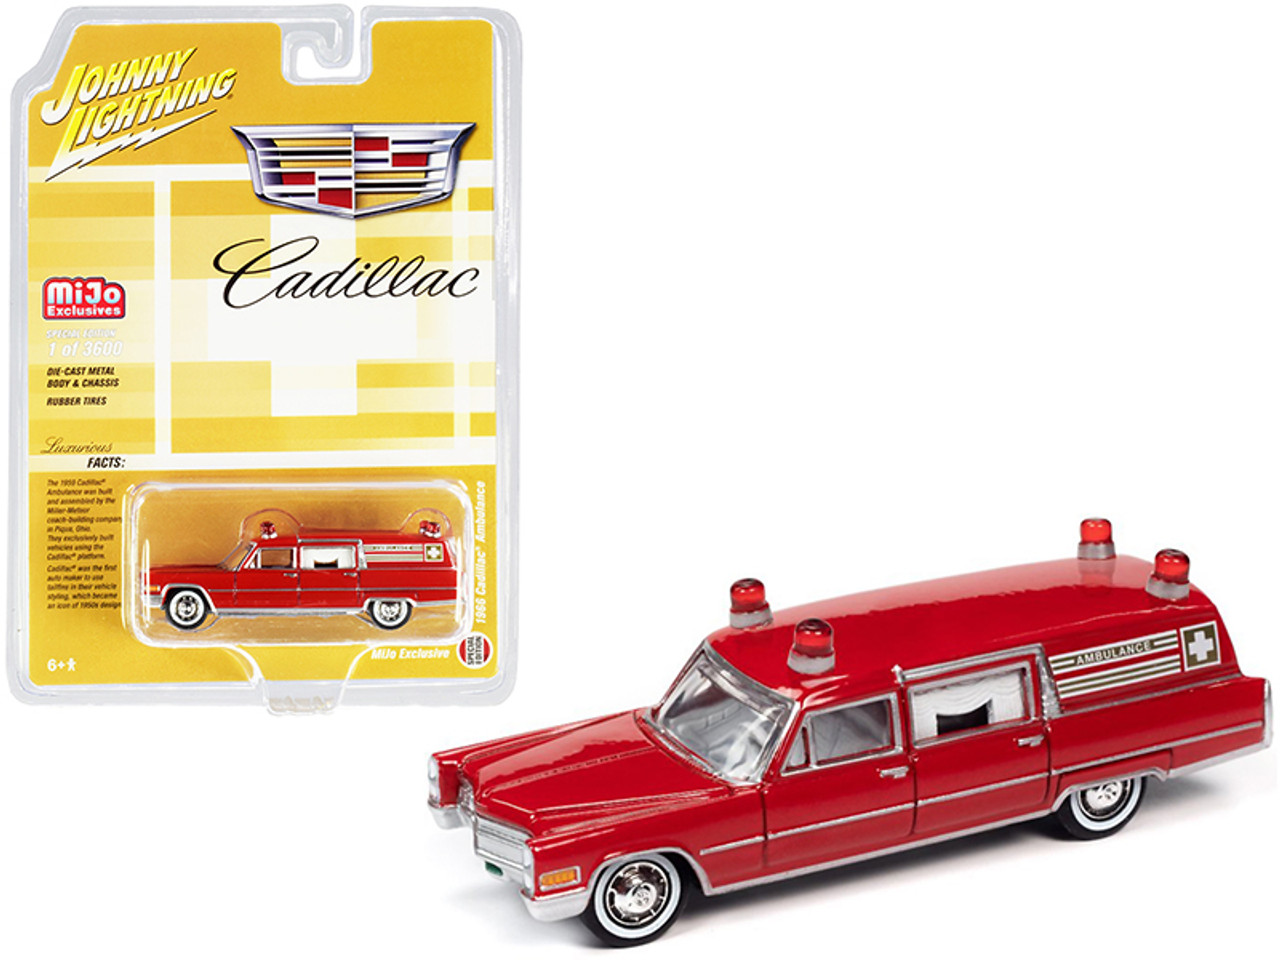 1966 Cadillac Ambulance Red "Special Edition" Limited Edition to 3600 pieces Worldwide 1/64 Diecast Model Car by Johnny Lightning